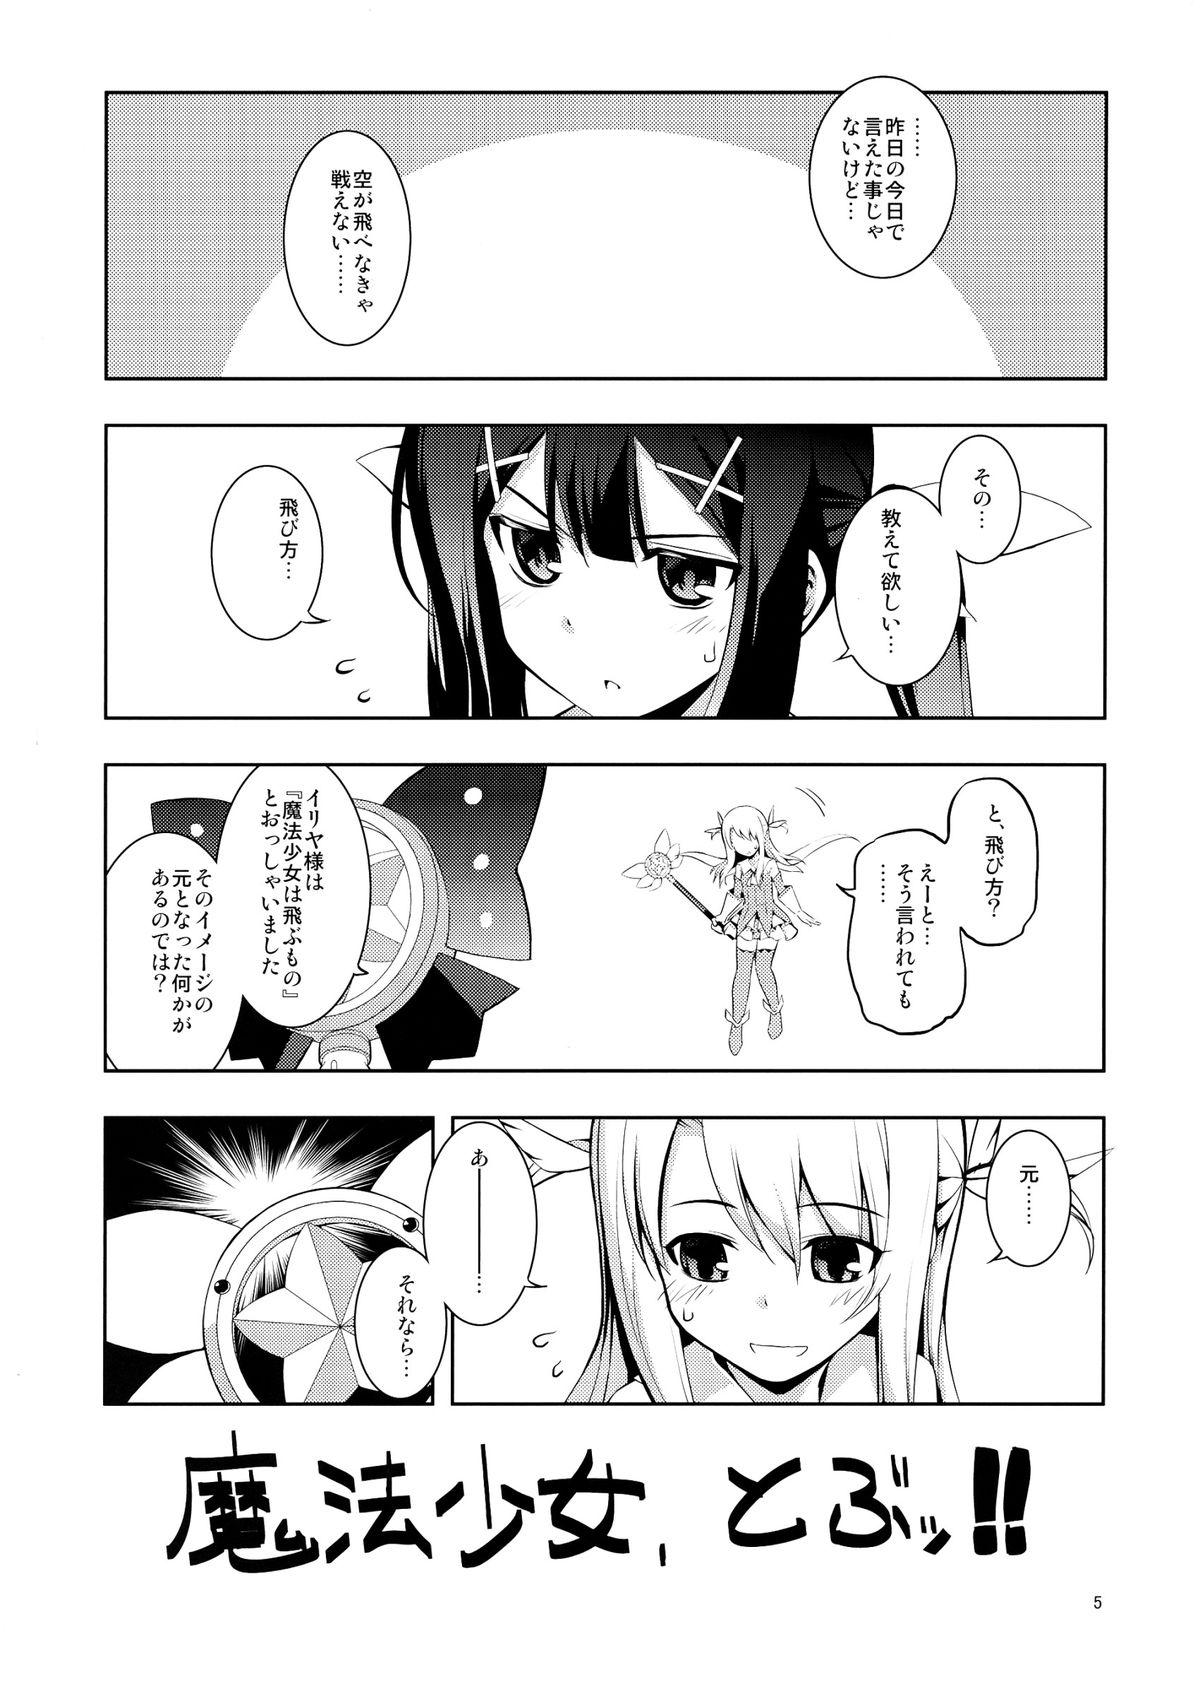 Throat Fuck RE 18 - Fate kaleid liner prisma illya Cut - Page 5